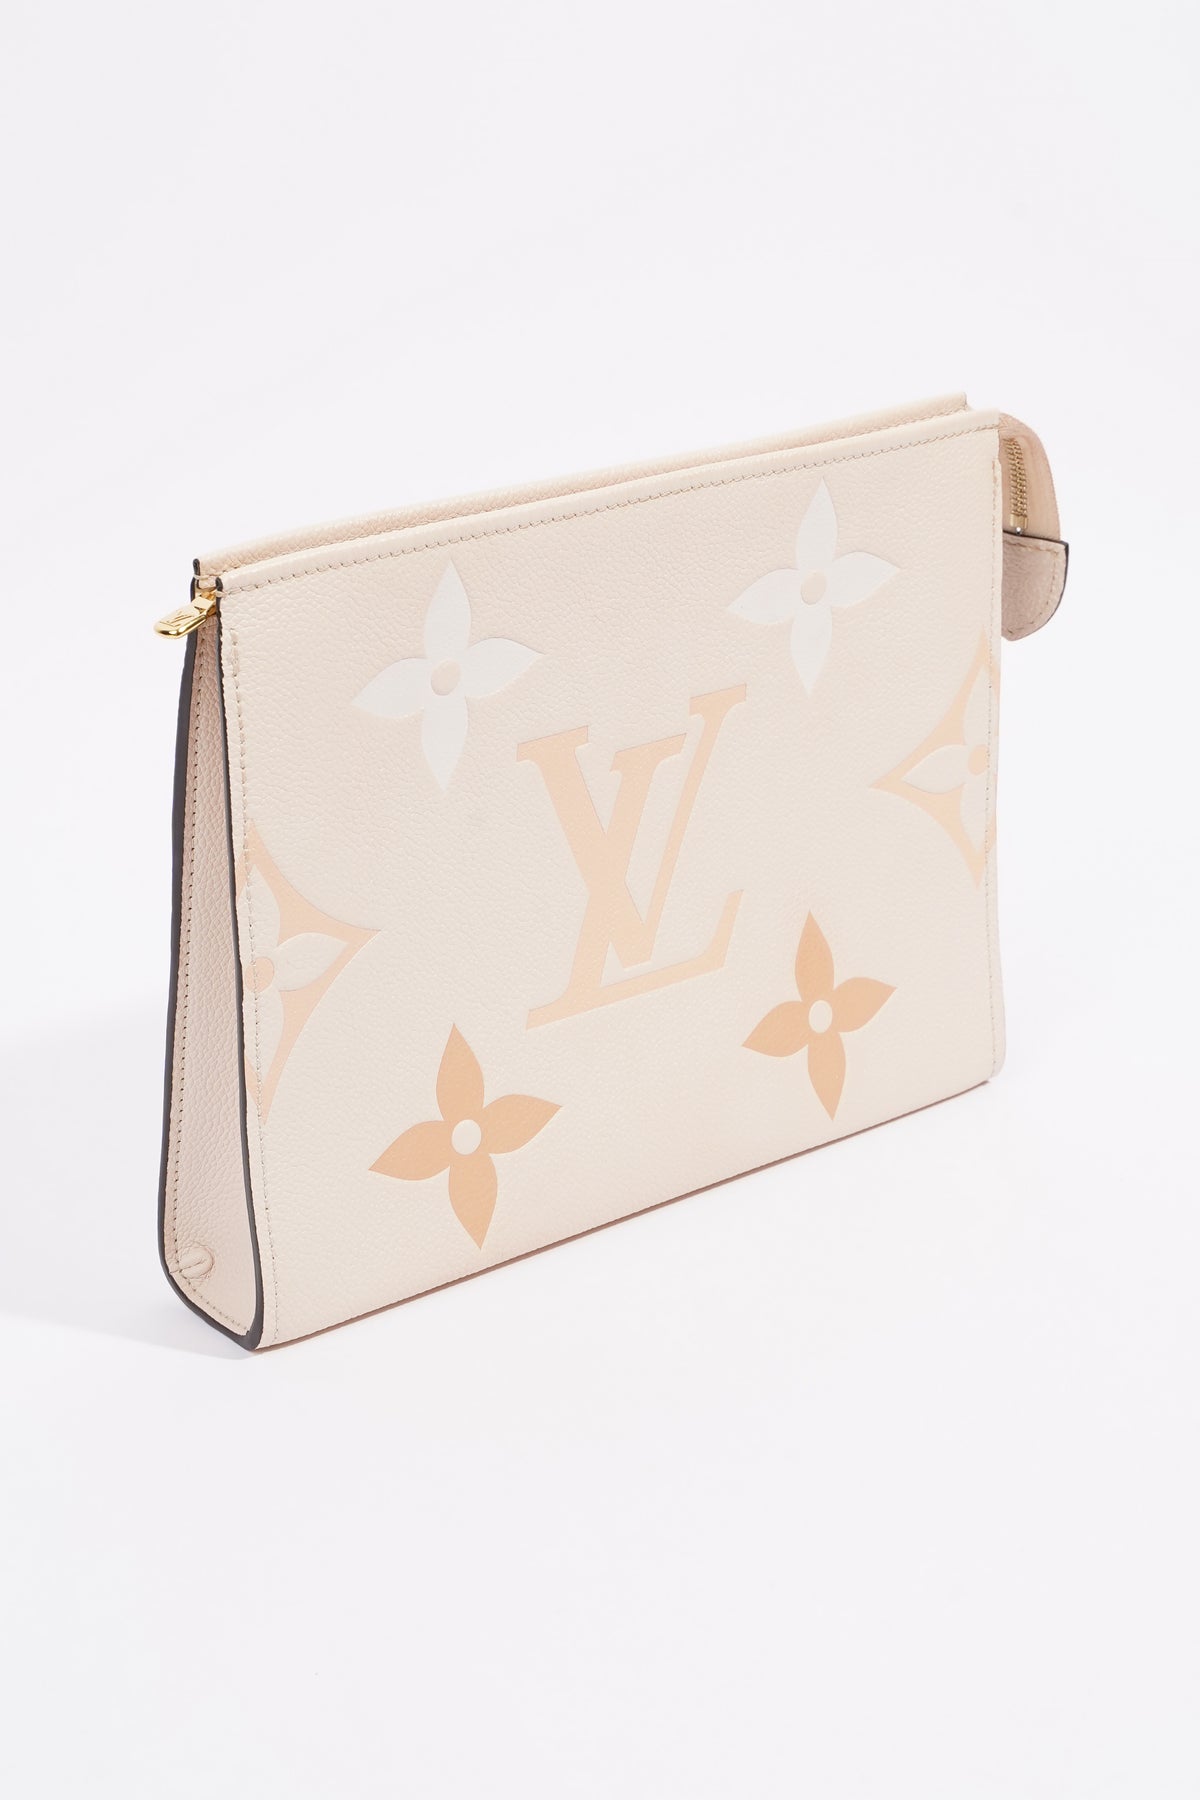 Louis Vuitton 2021 By The Pool Toiletry Pouch 26